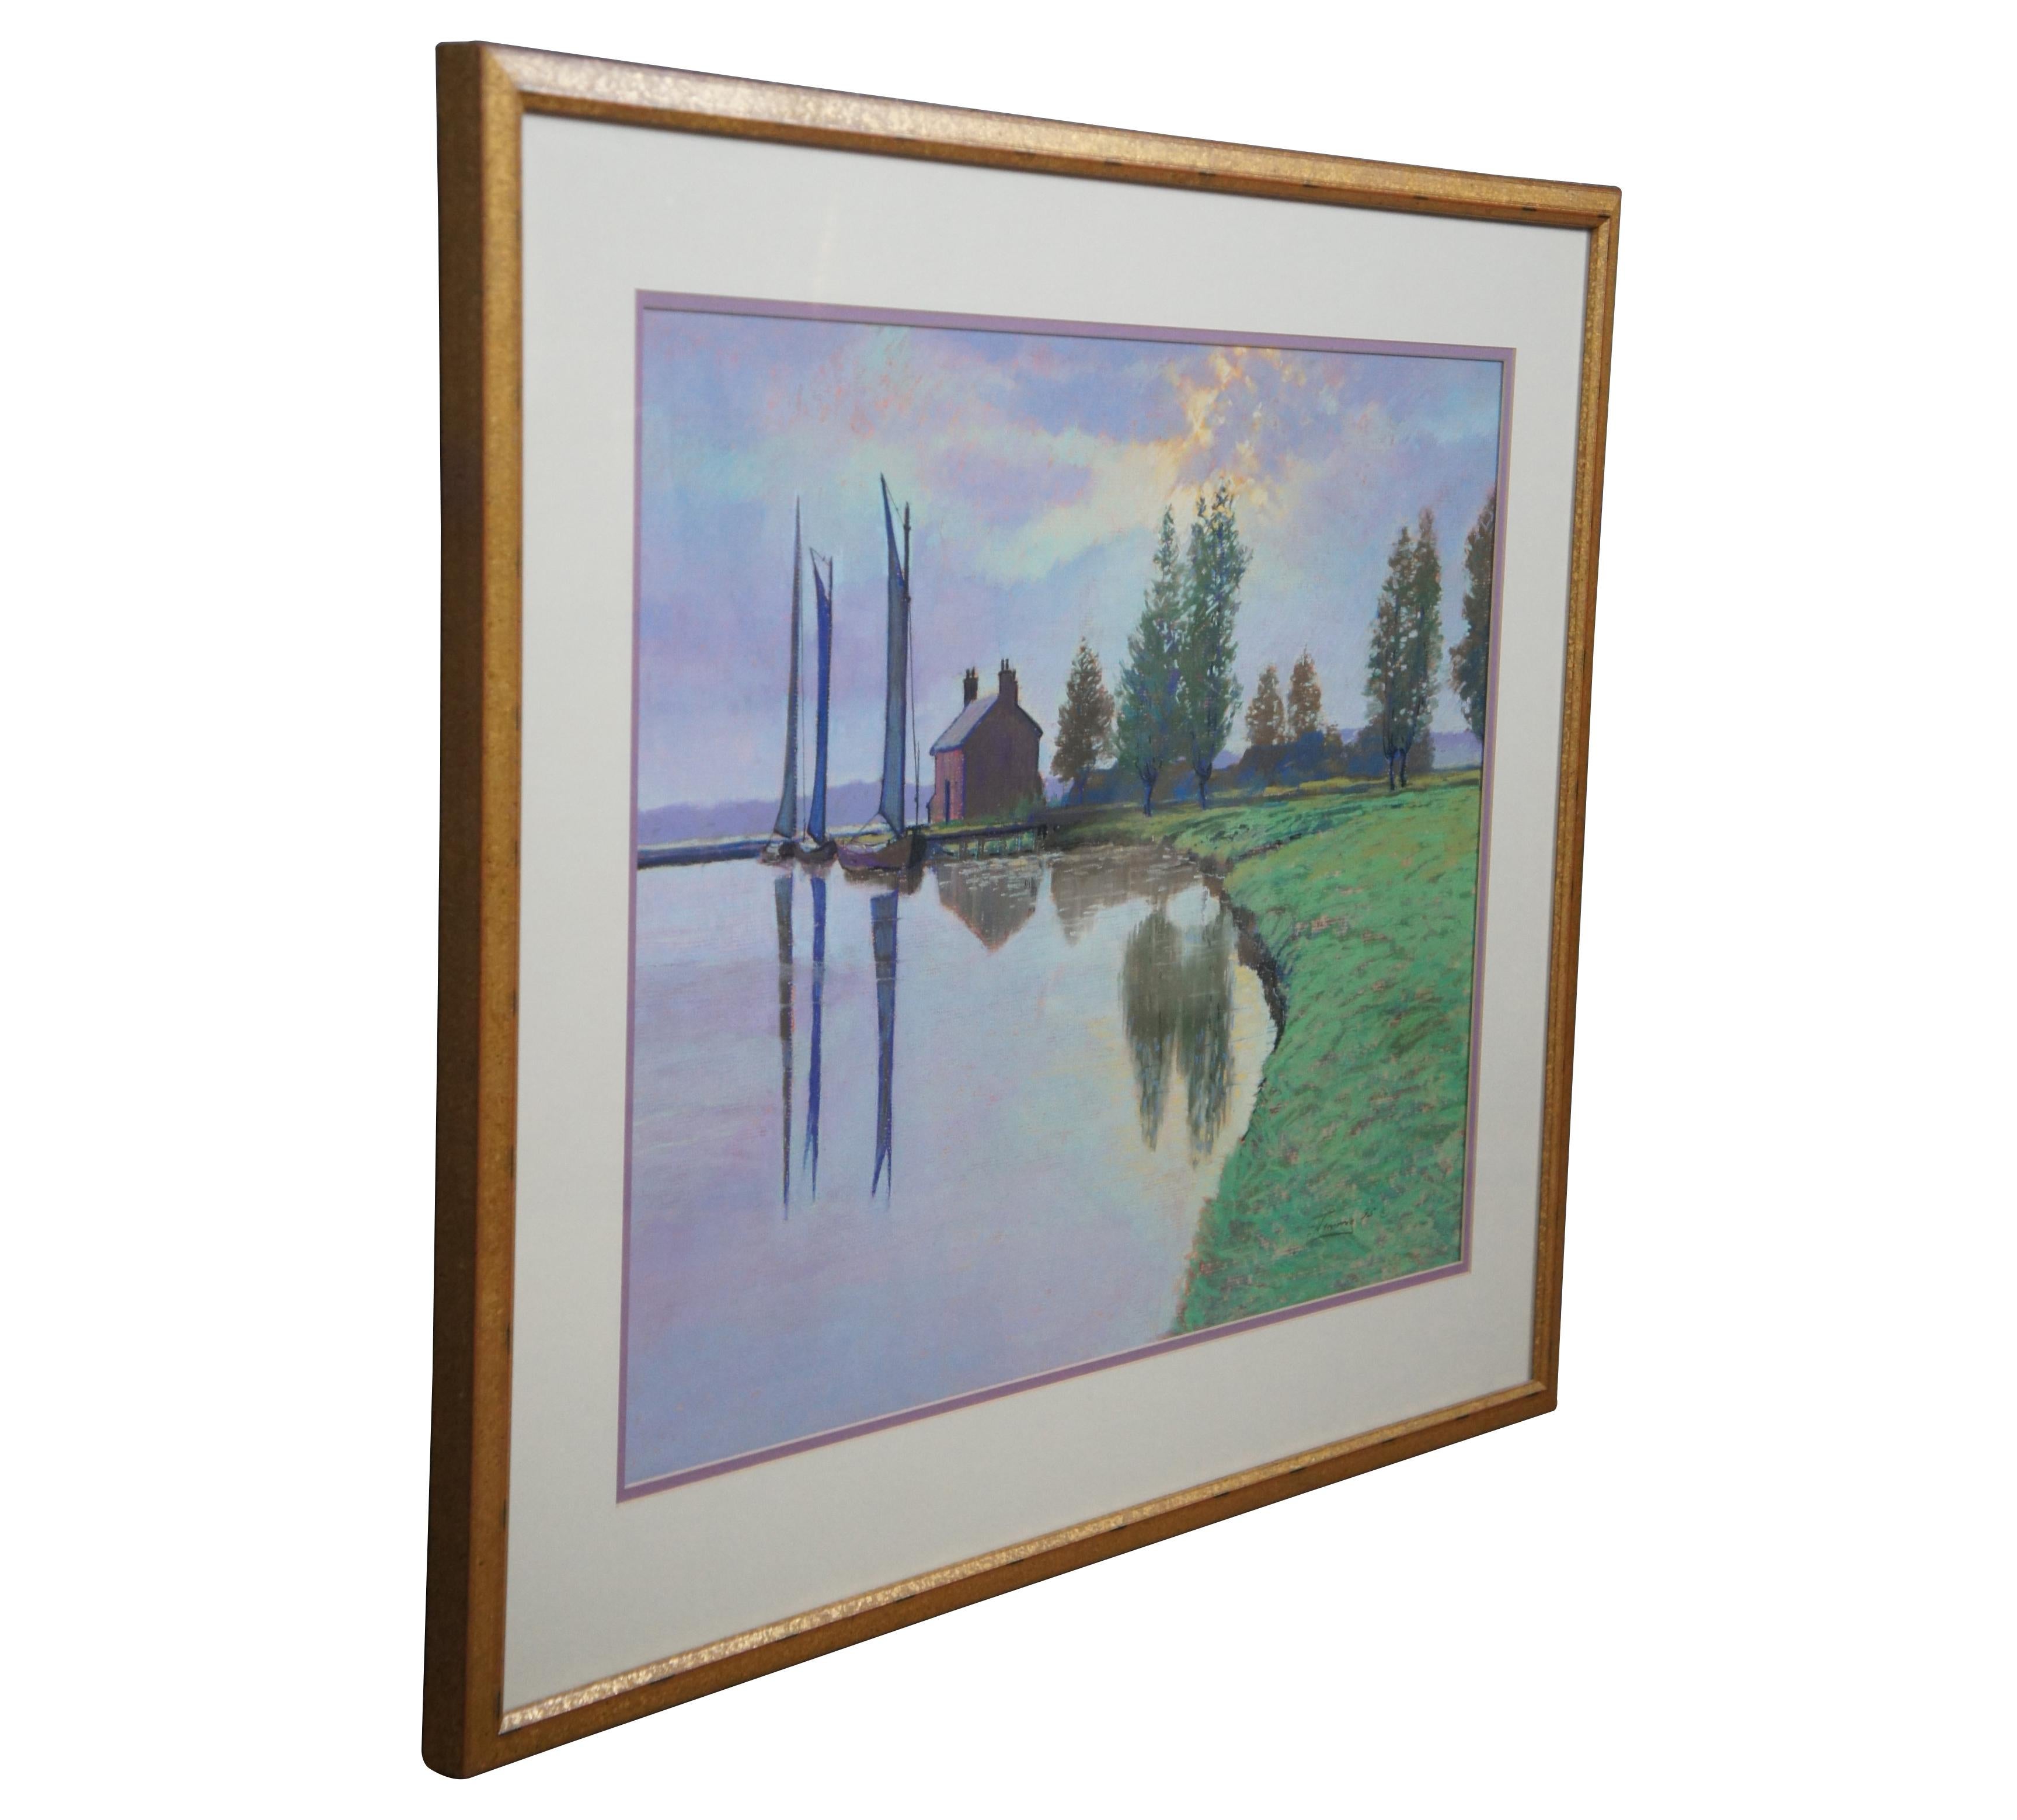 An eye catching late 20th century watercolor painting, signed Fleming lower right. Features a countryside setting with sailboats near a farmhouse. Three sailboats are docked on a calm body of water next to a lush green field. The sun overhead